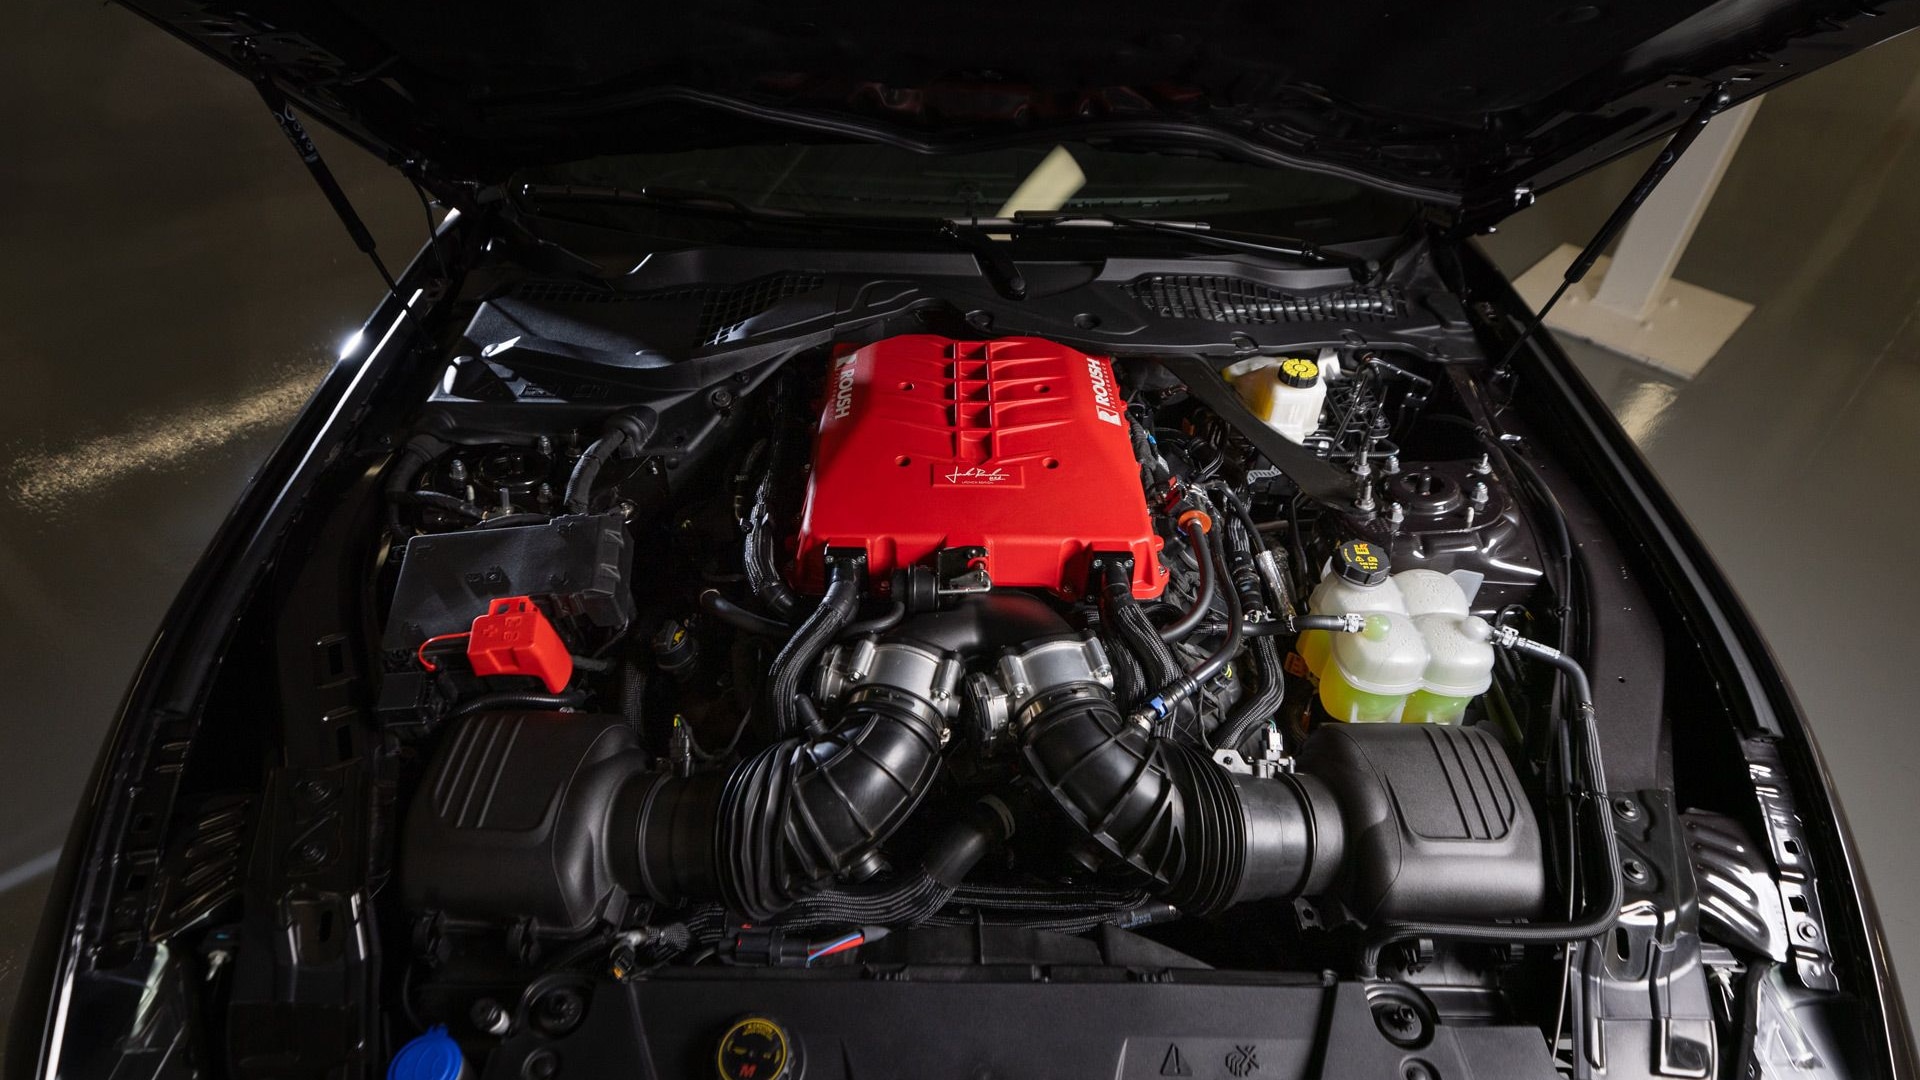 Roush supercharger for seventh-generation Mustang V-8 delivers 810 hp